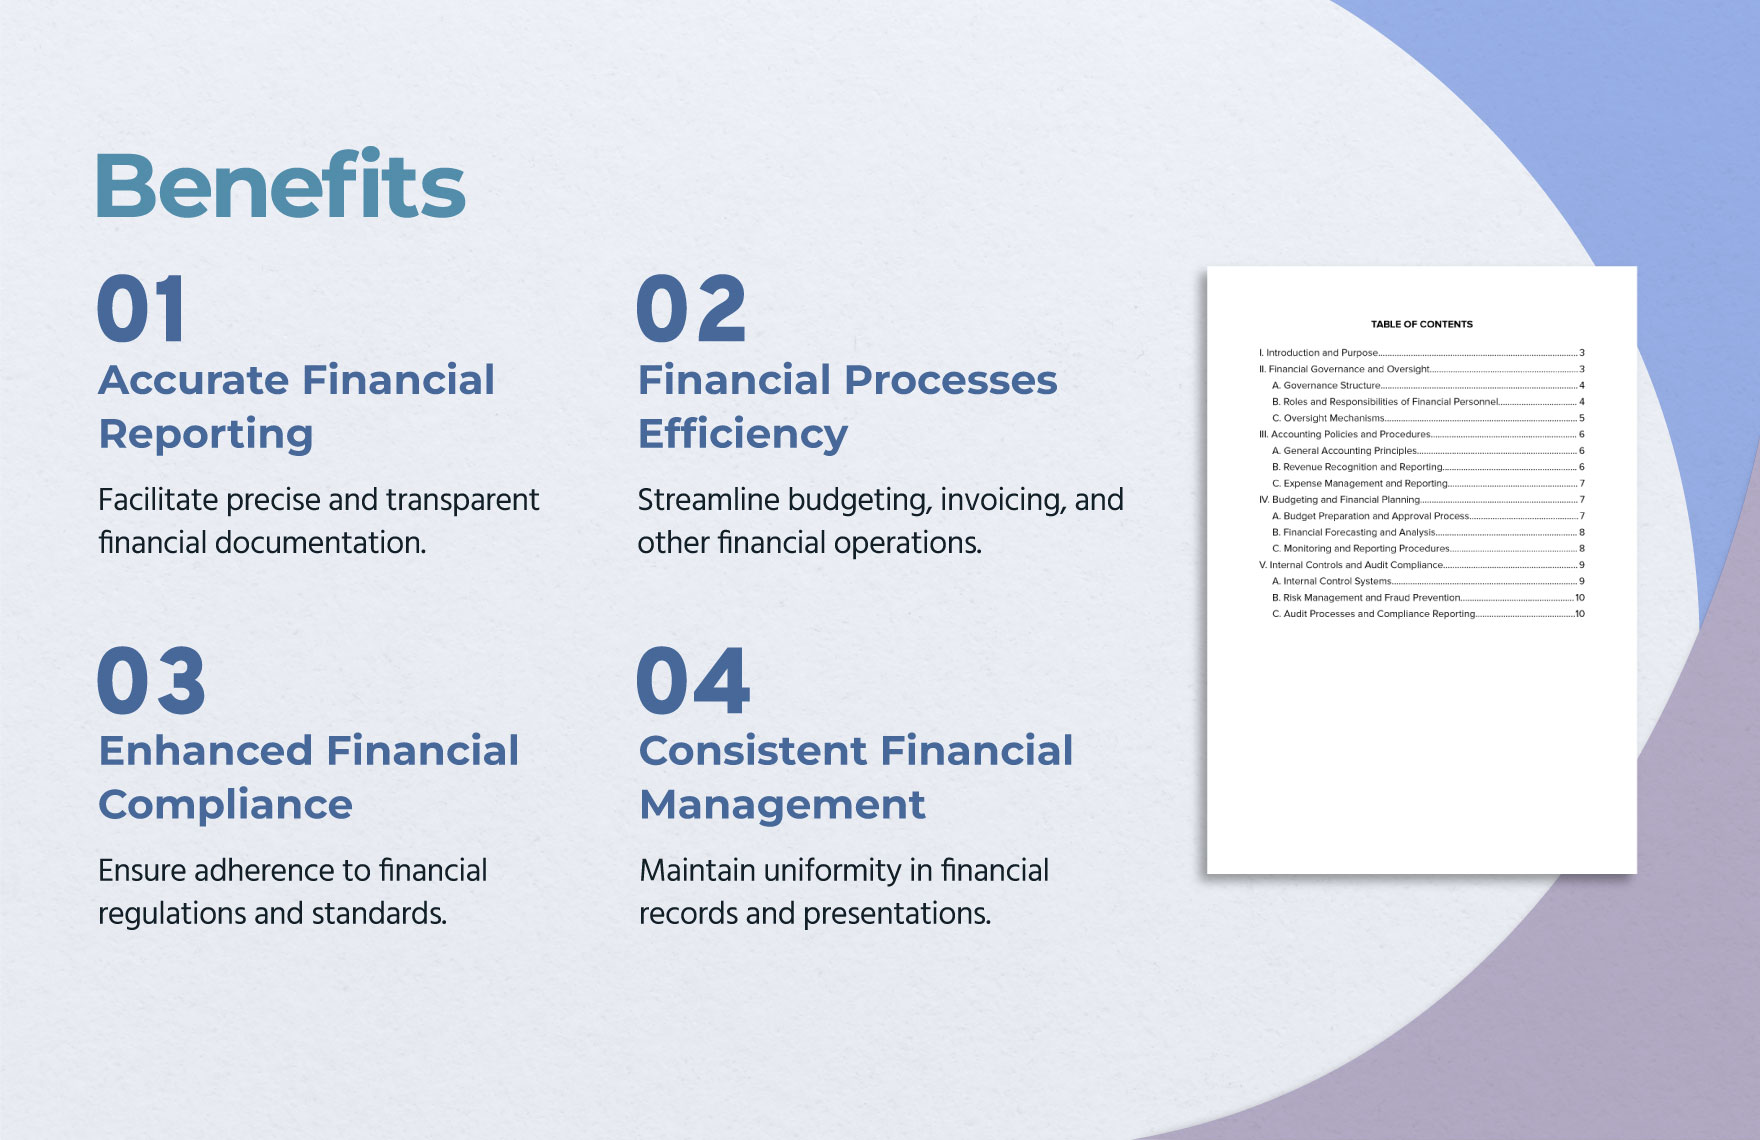 Financial Policy & Procedure Manual Template